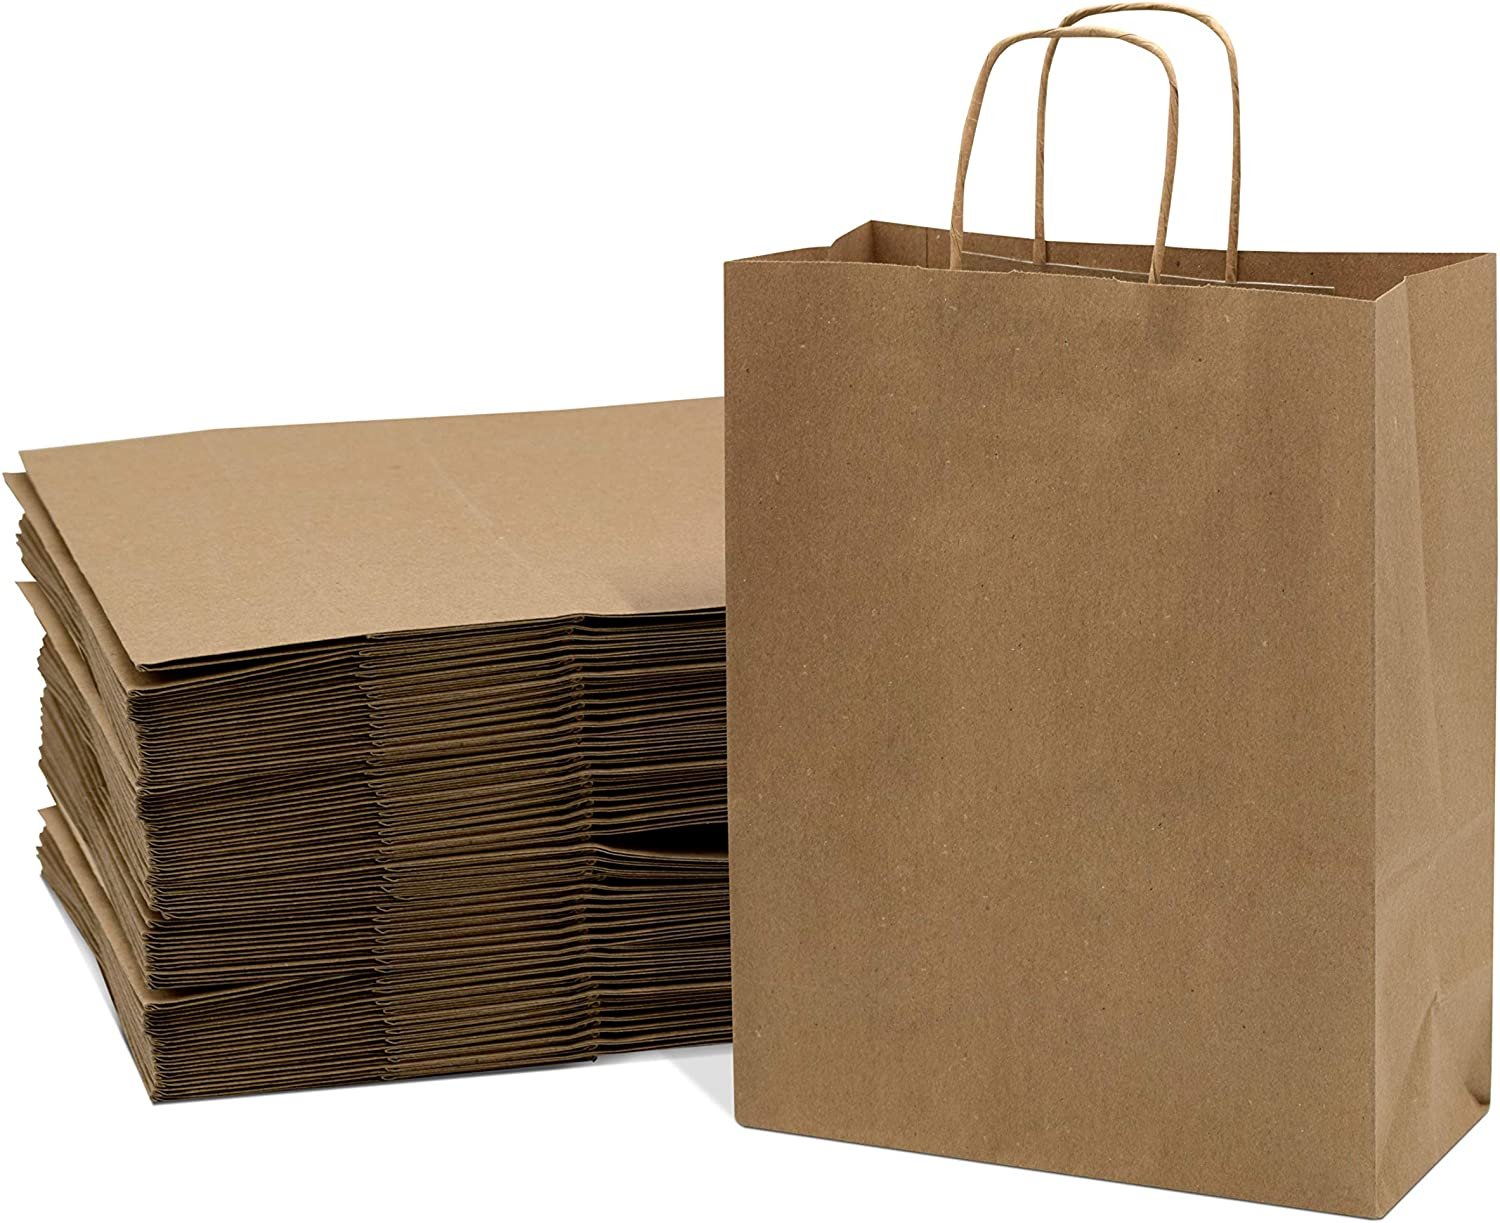 Brown Paper Bags with Handles - 10x5x13 - 100 pcs - Size M/L - Free Shipping & Returns